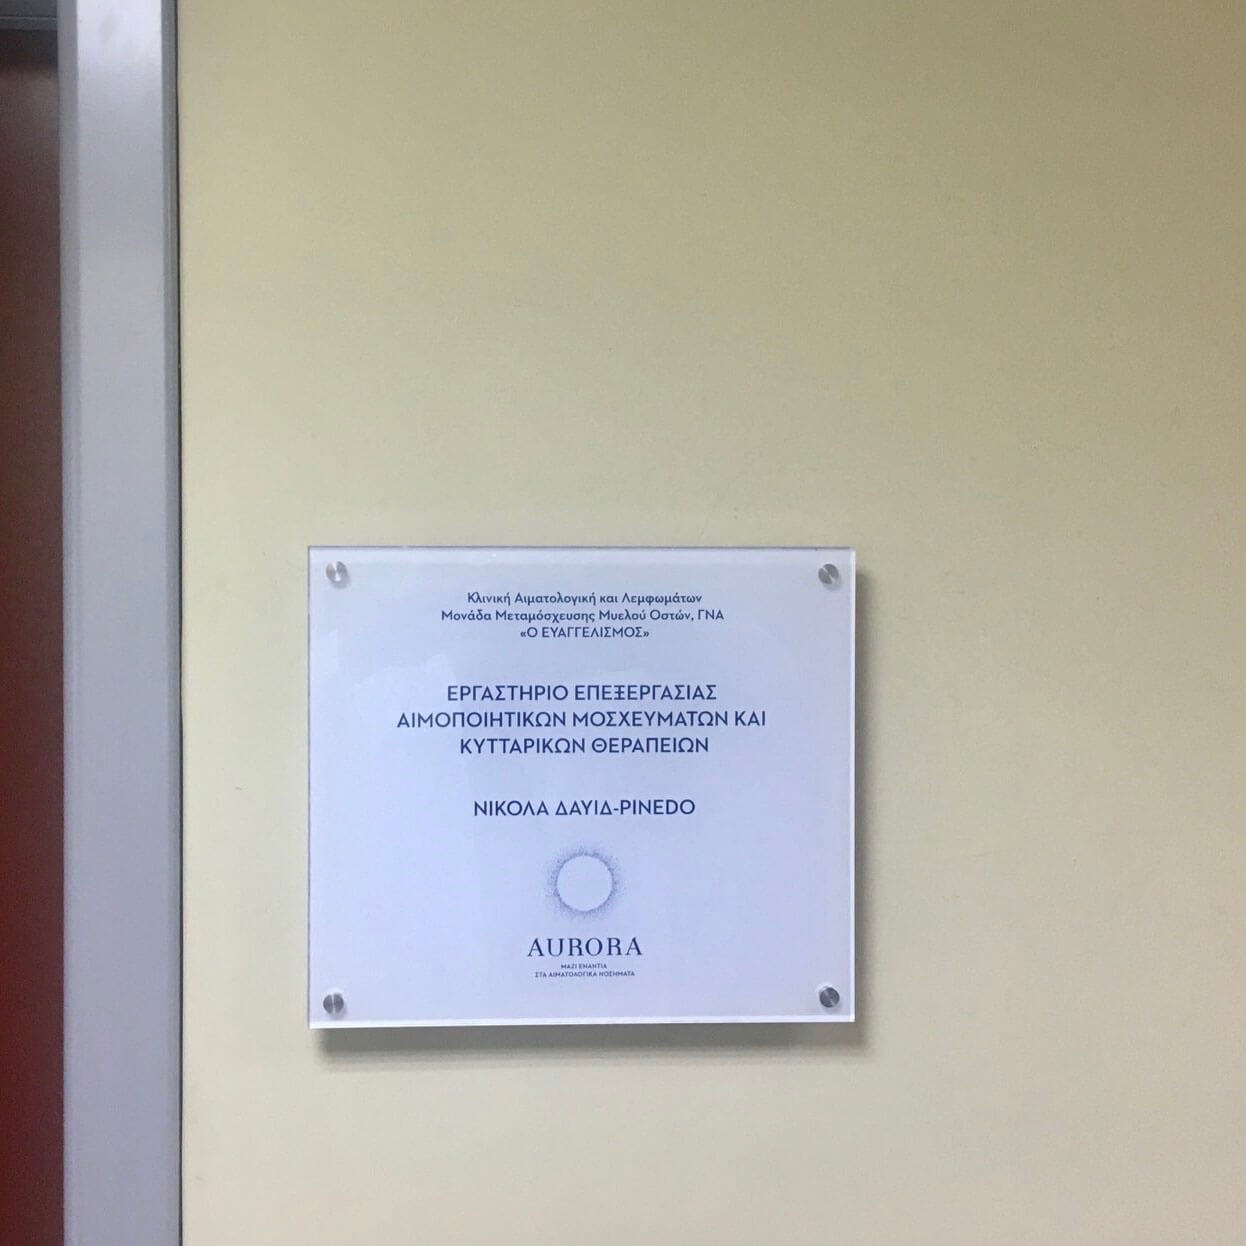 Naming of the Nicola David-Pinedo Hematopoietic Graft Processing and Cellular Therapy Laboratory at the EVANGELISMOS General Hospital